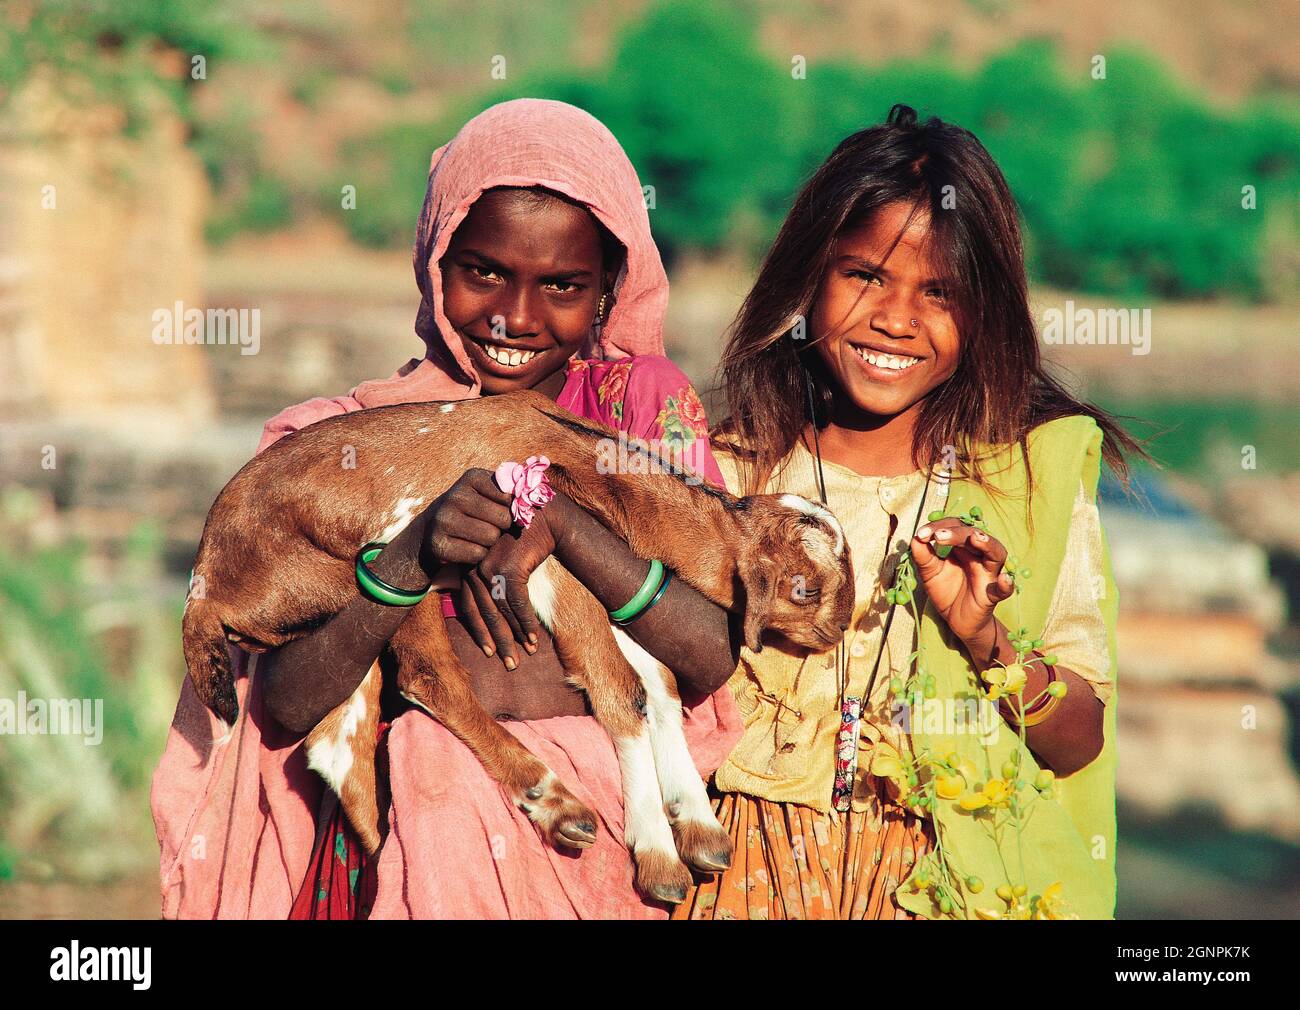 India. Rajasthan. Udaipur. Nathdwara. Rural area children. Two girls with a goat. Stock Photo